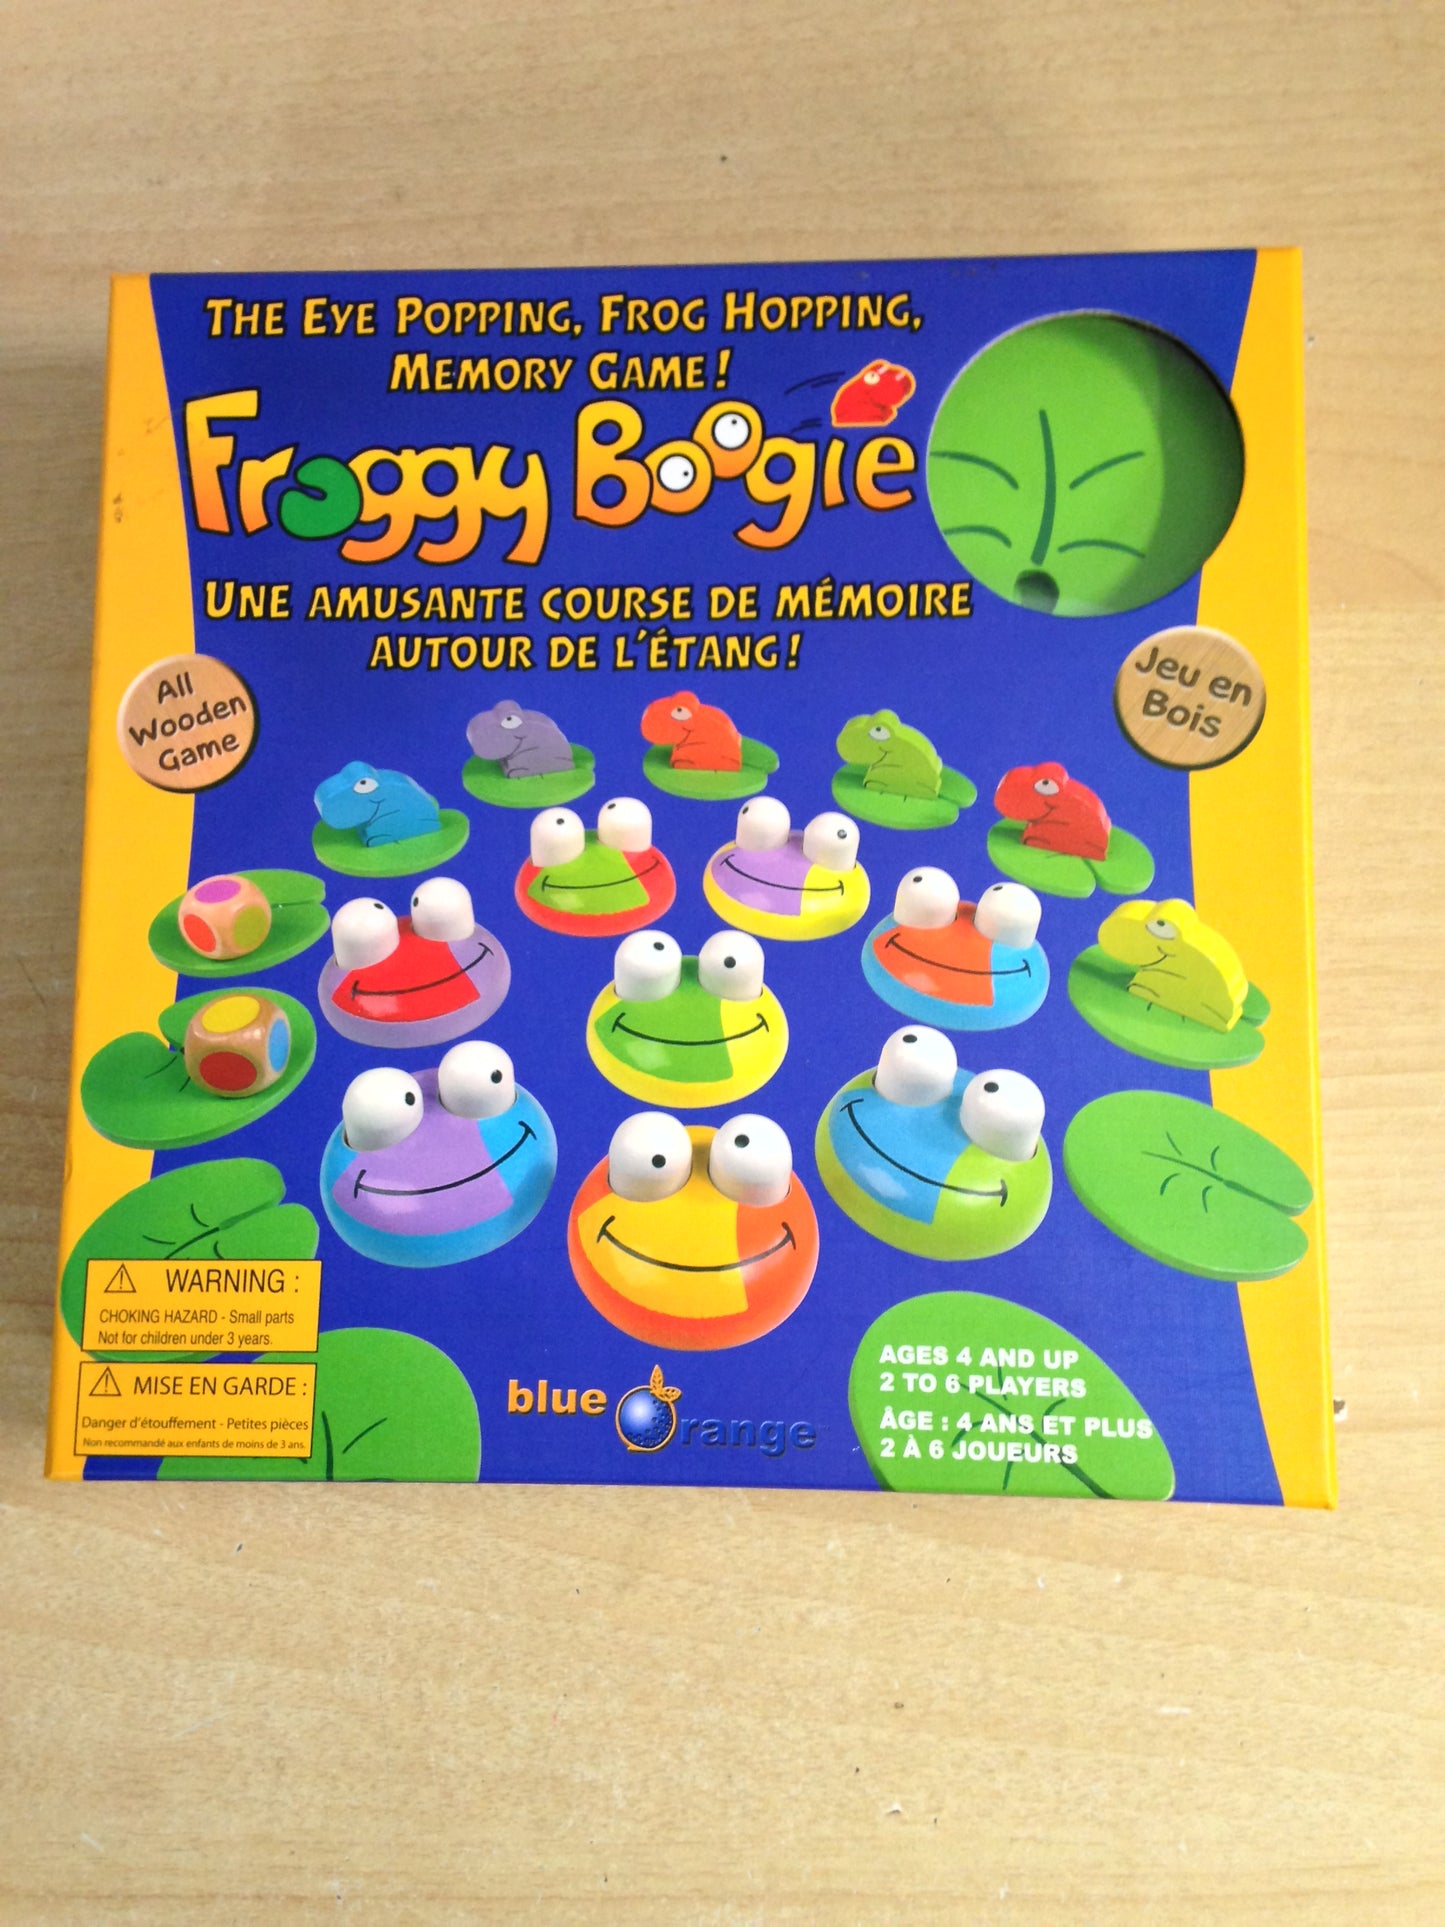 Y Game Groggy Boogie All Wood Memory Game Educational Complete As New